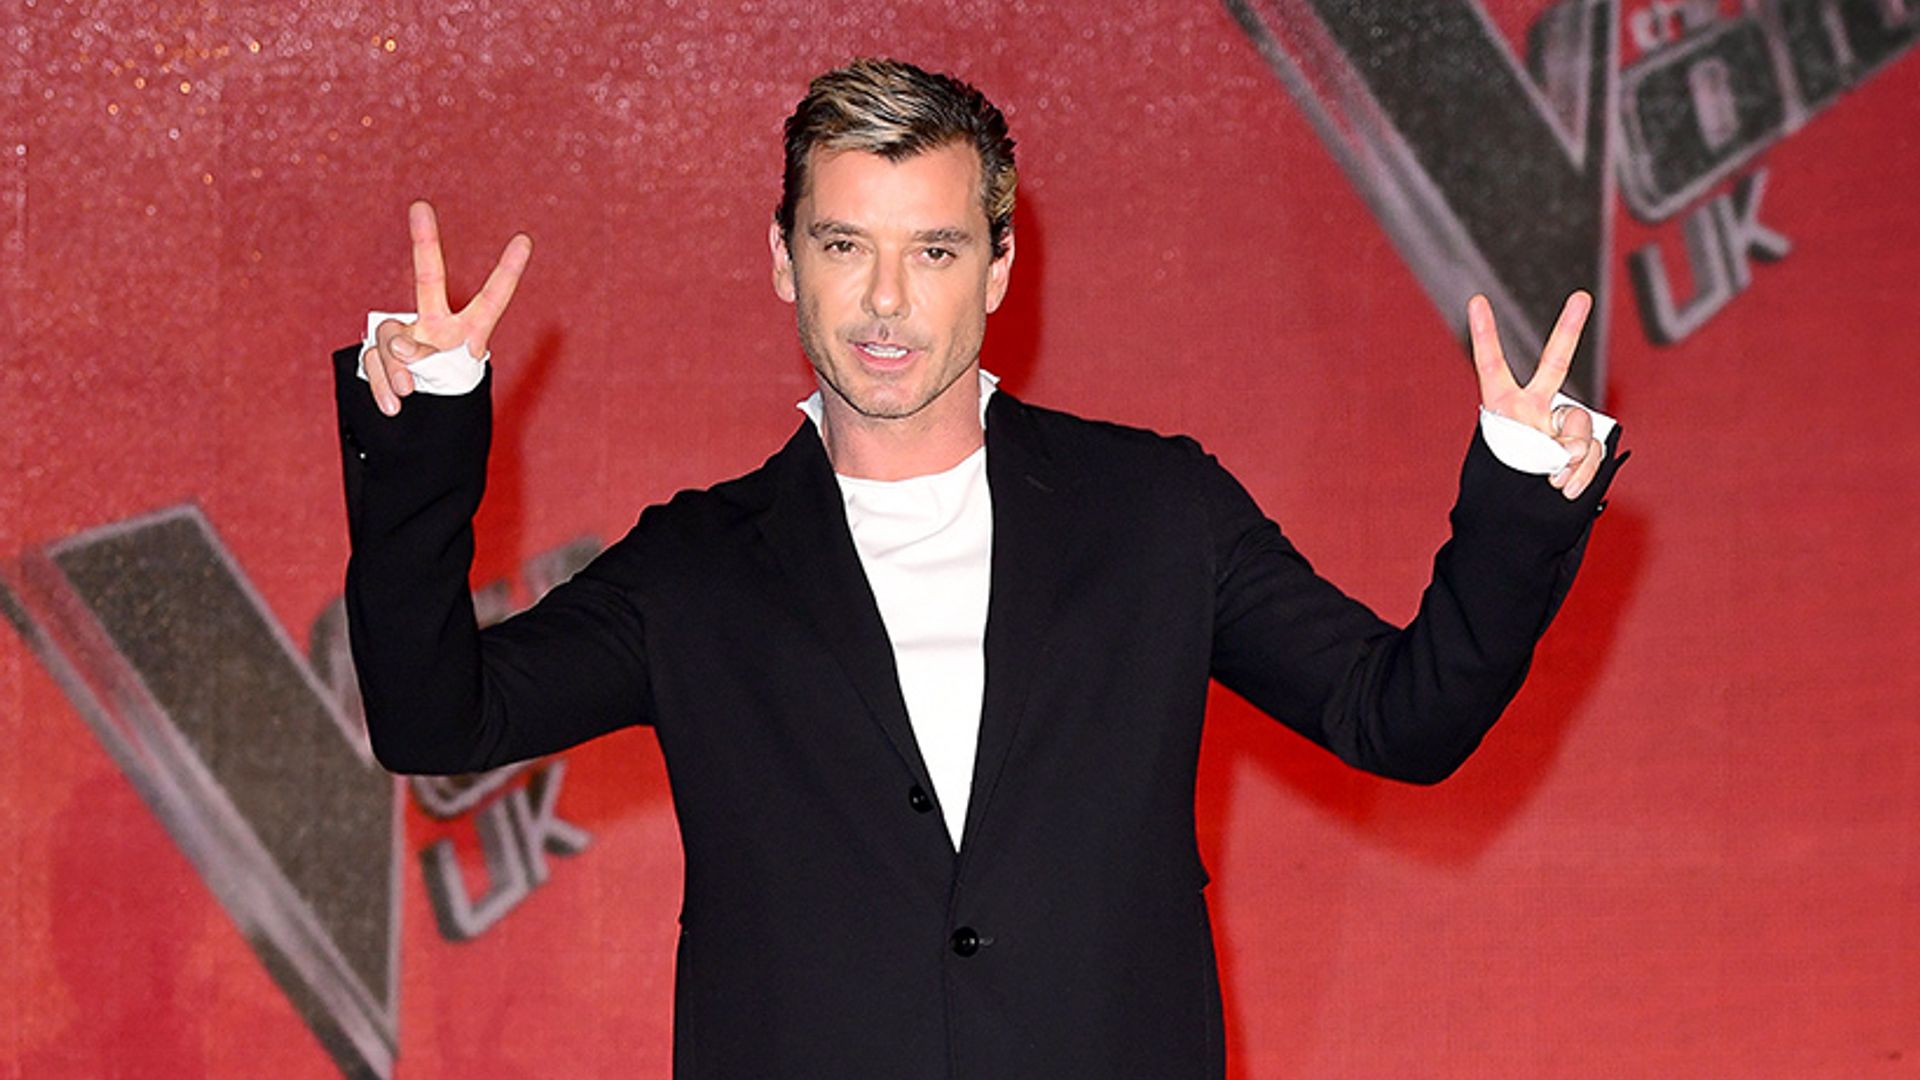 Has Gavin Rossdale been axed from The Voice UK?